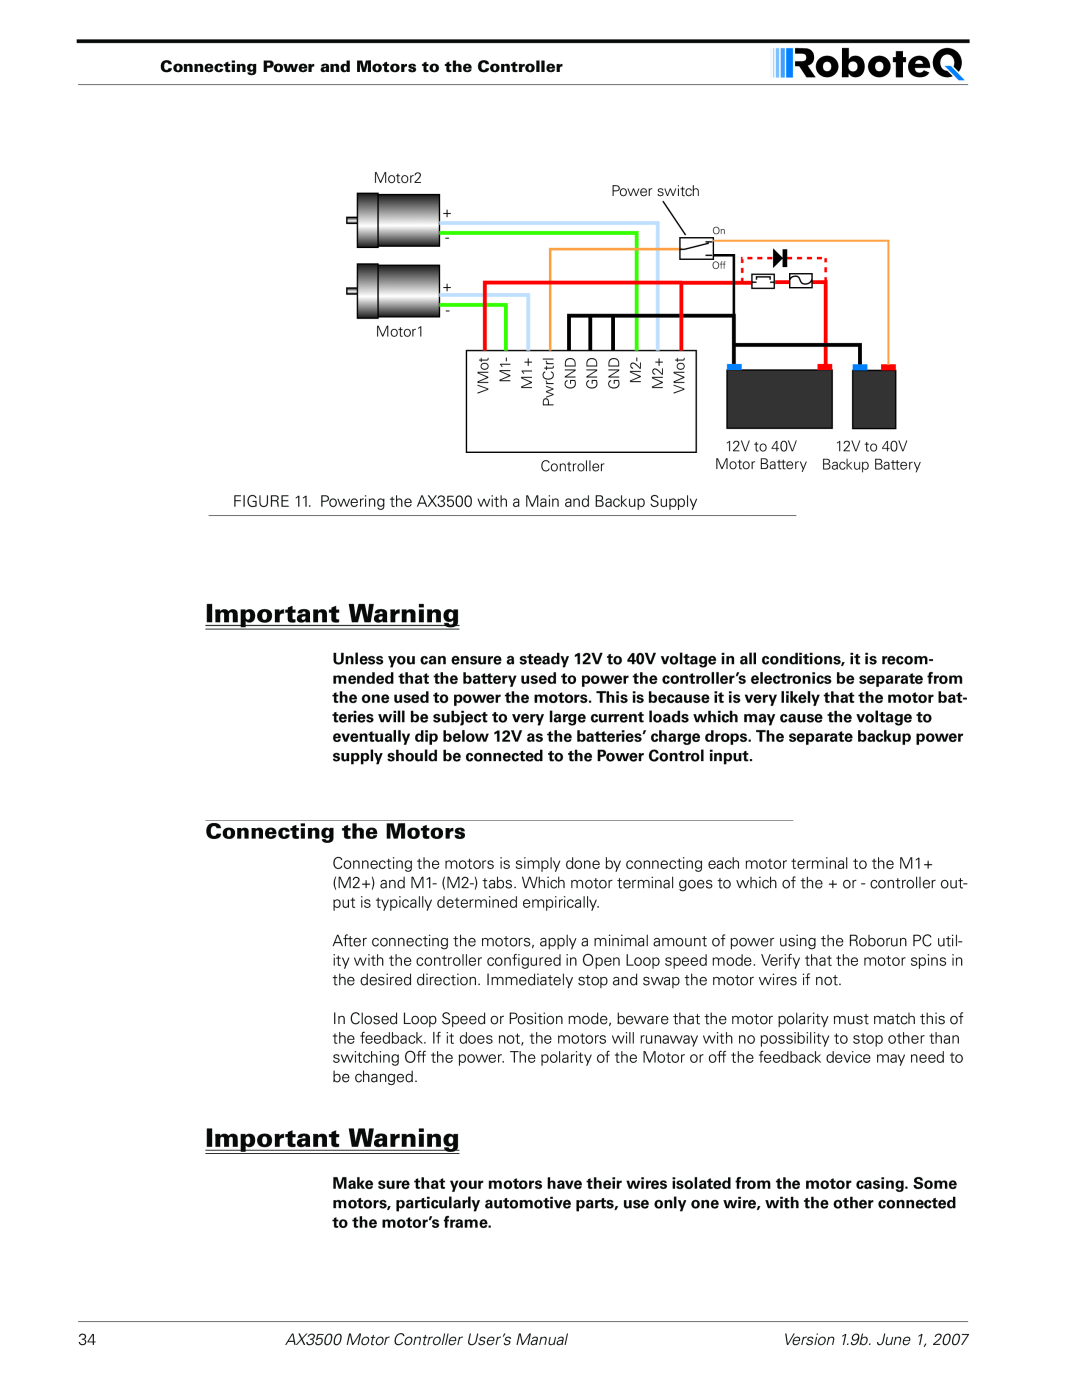 RoboteQ AX3500 user manual Connecting the Motors, Important Warning, Connecting Power and Motors to the Controller 